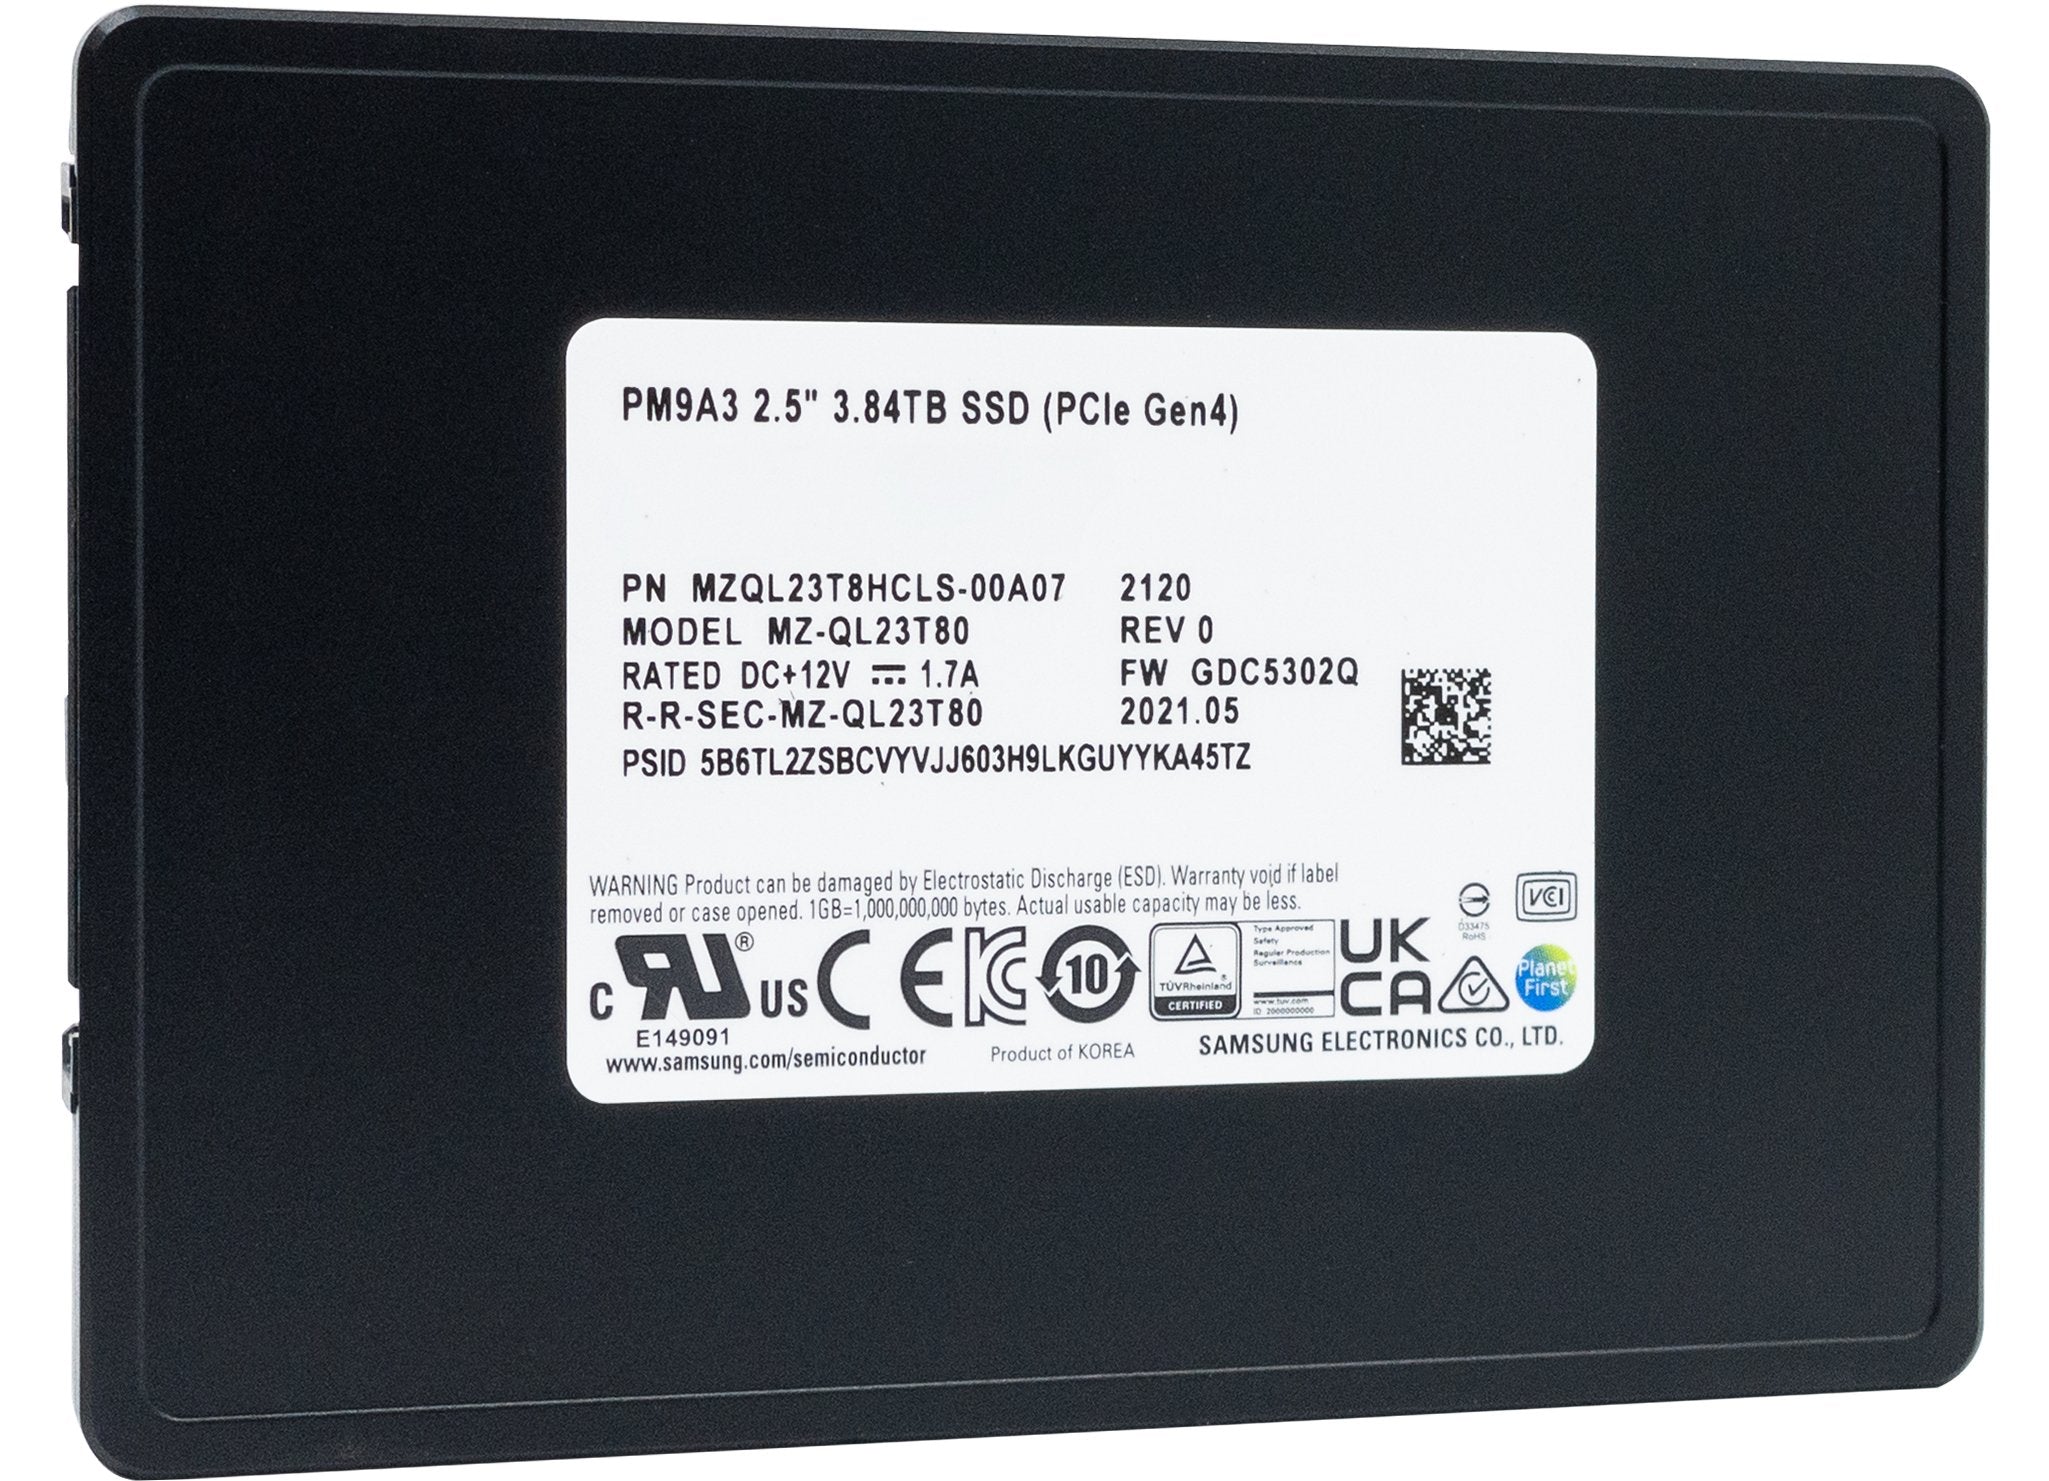 Samsung PM9A3 MZ-QL23T80 MZQL23T8HCLS-00A07 3.84TB PCIe Gen 4.0 x4 8GB/s Read Intensive 2.5in Recertified Solid State Drive